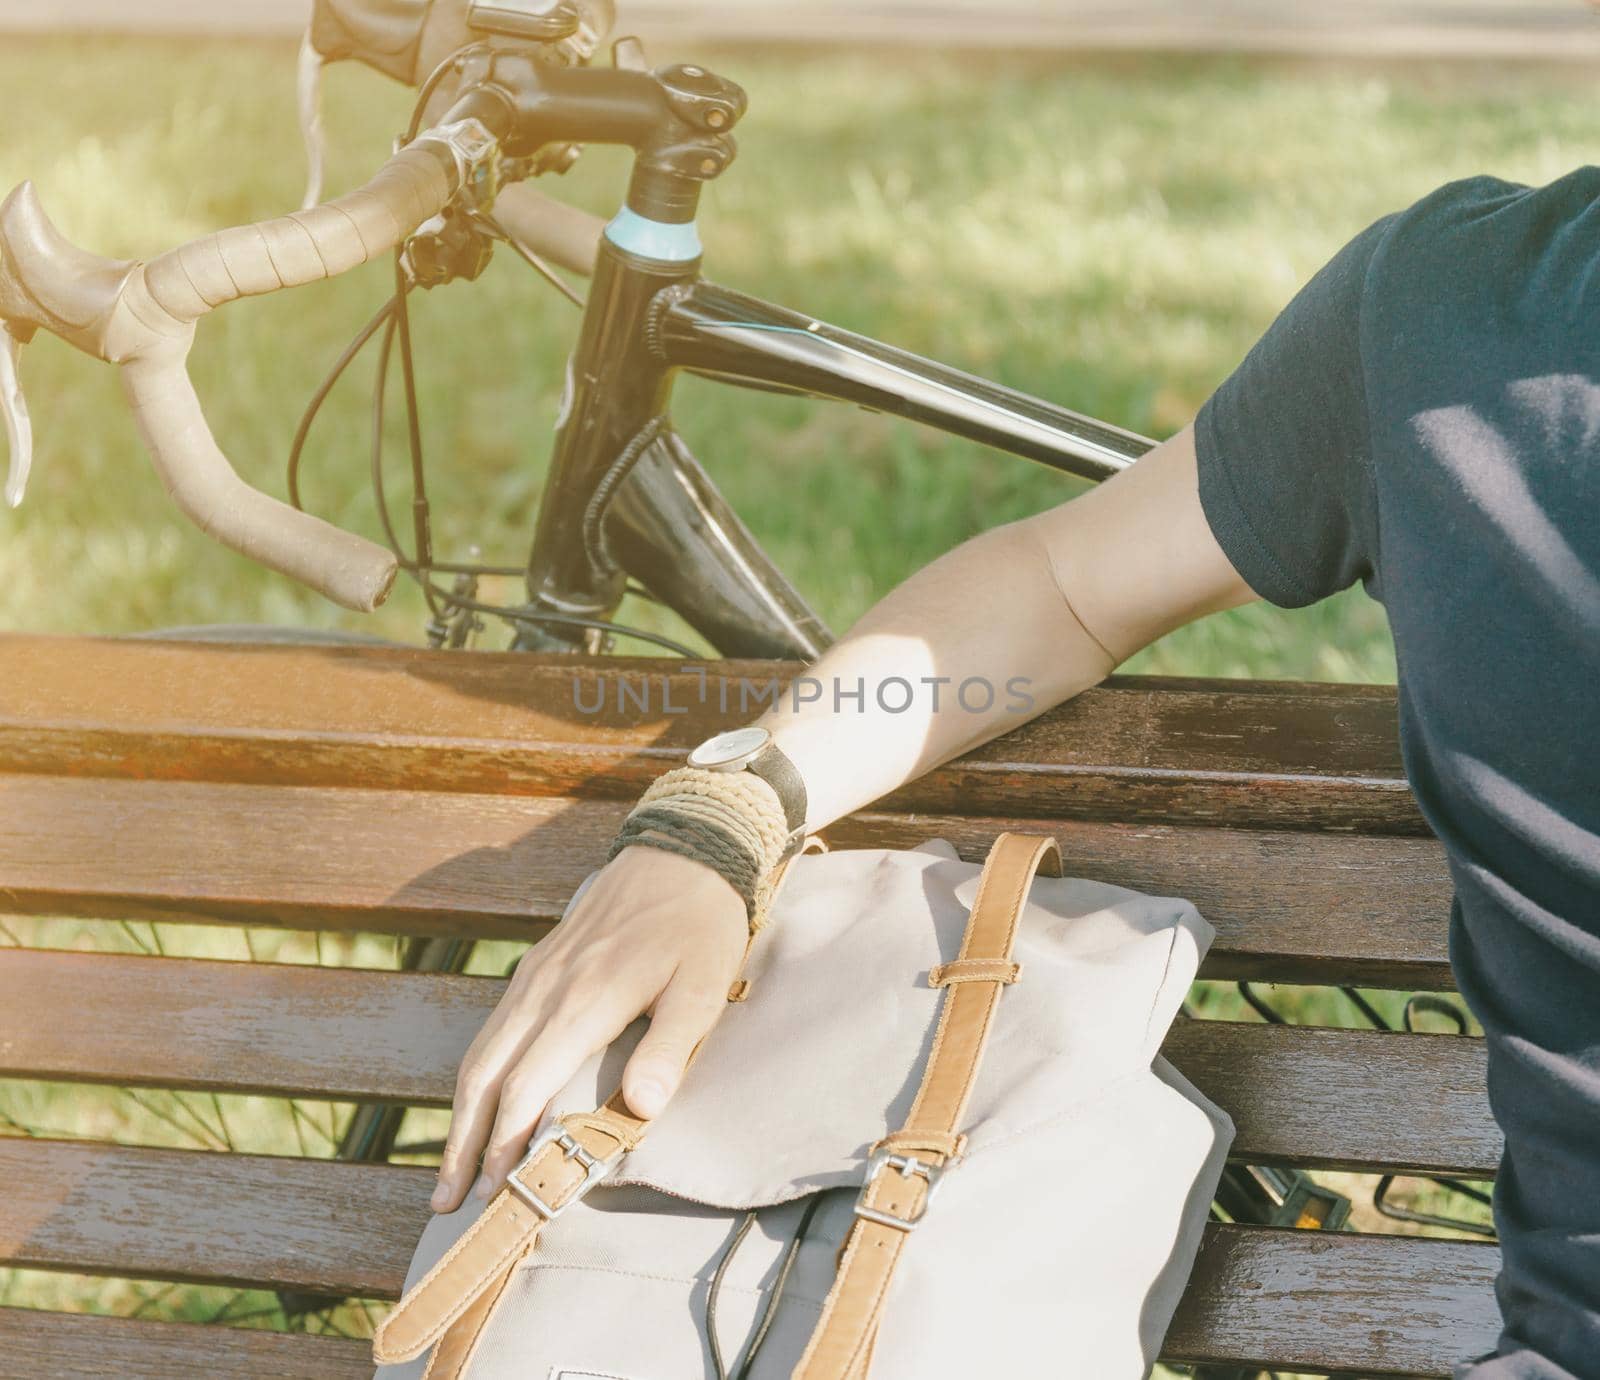 Cyclist with backpack rests in park. by alexAleksei